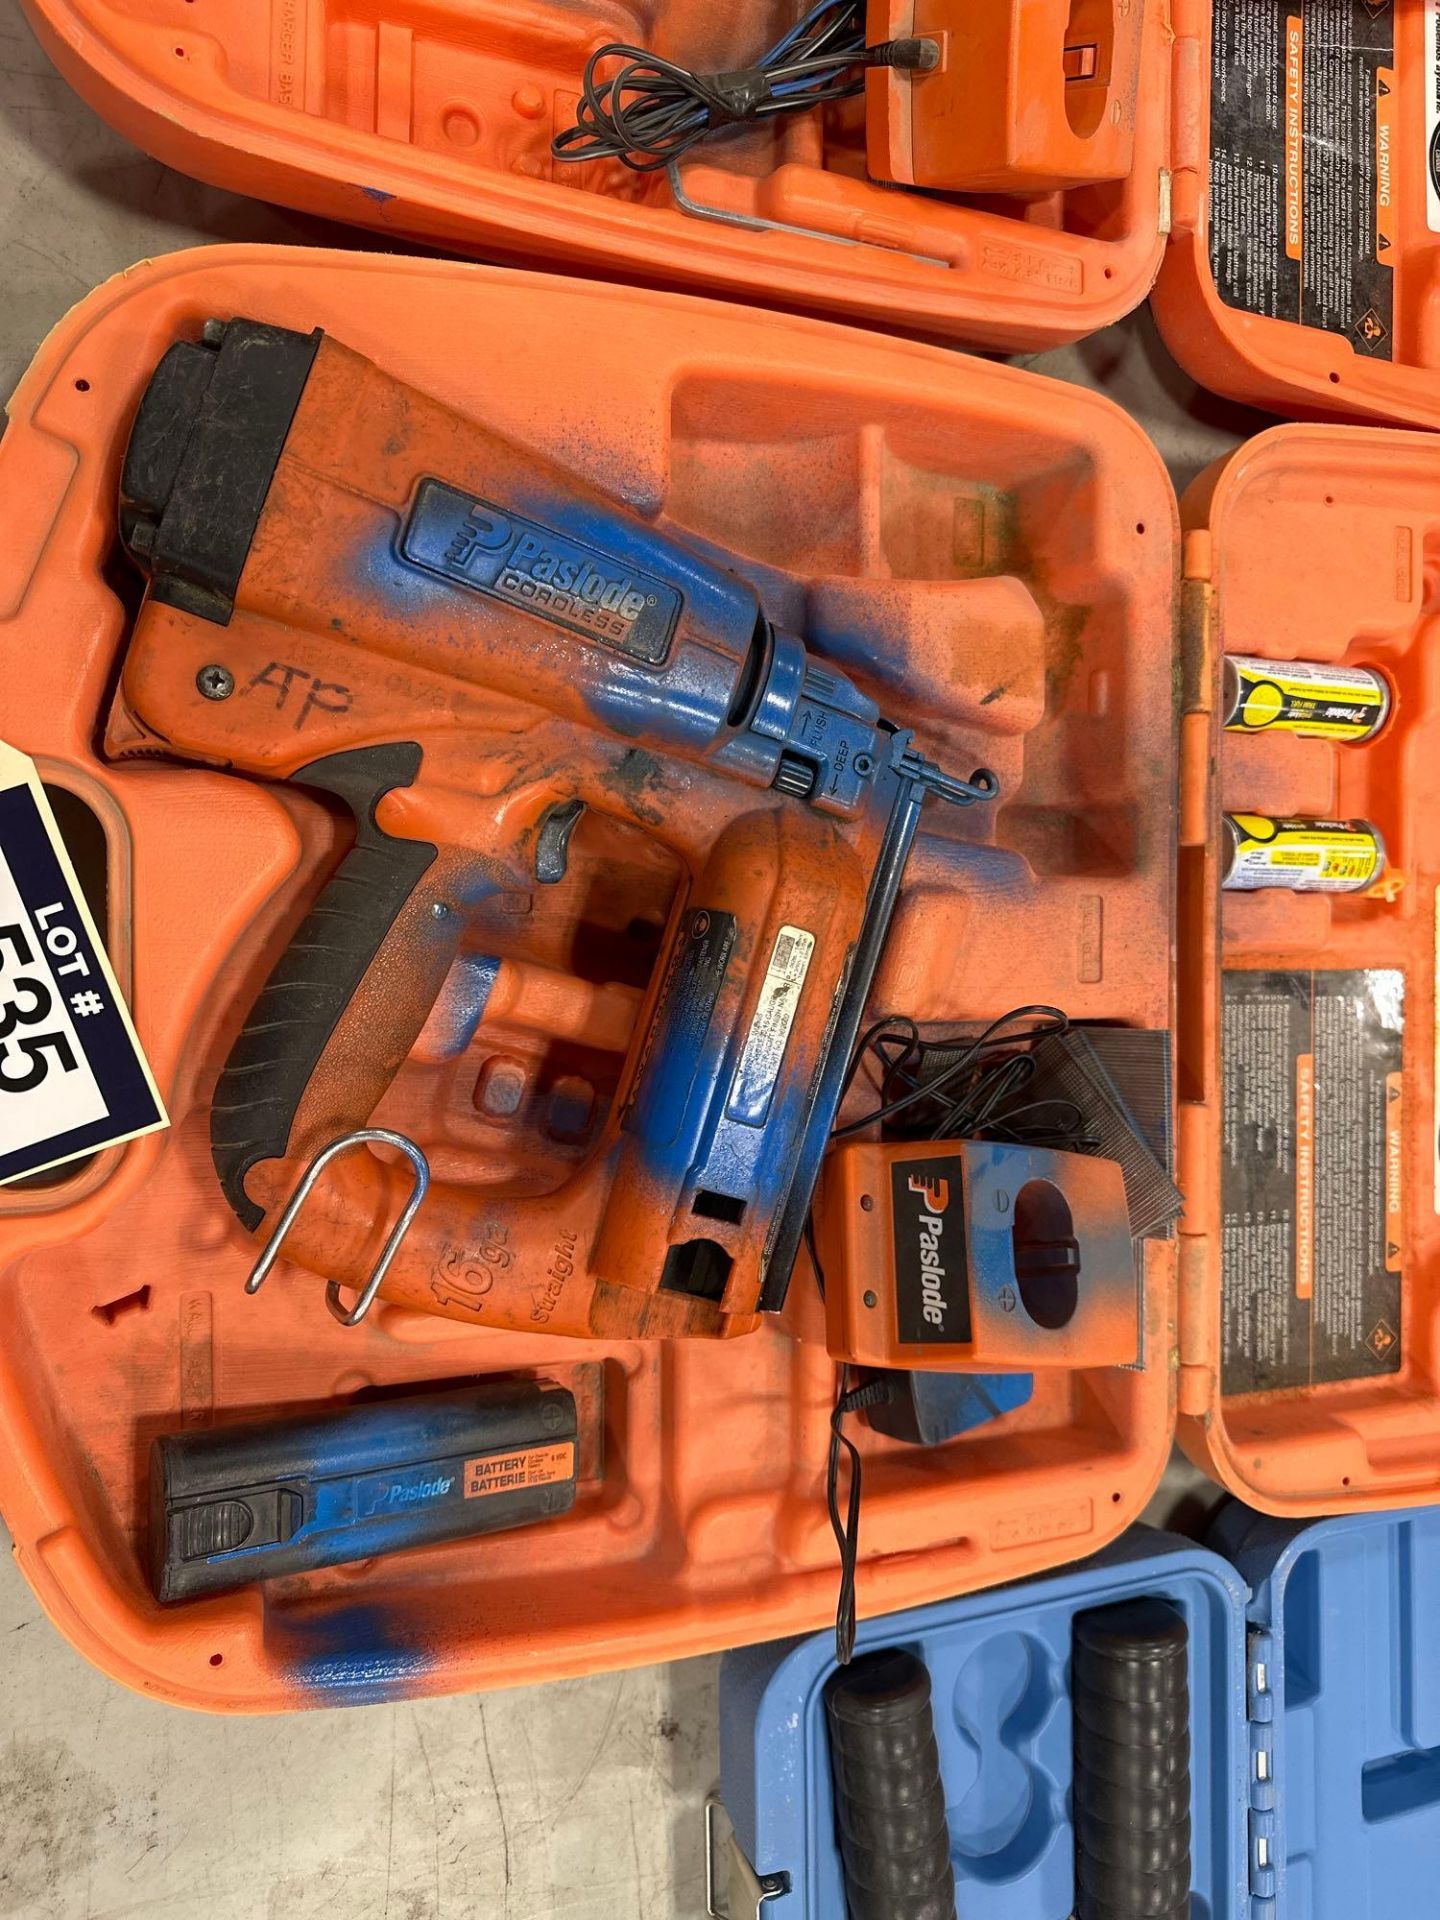 Paslode Cordless Finishing Nailer IM250S w/ (1) Battery and Charger - Image 3 of 4